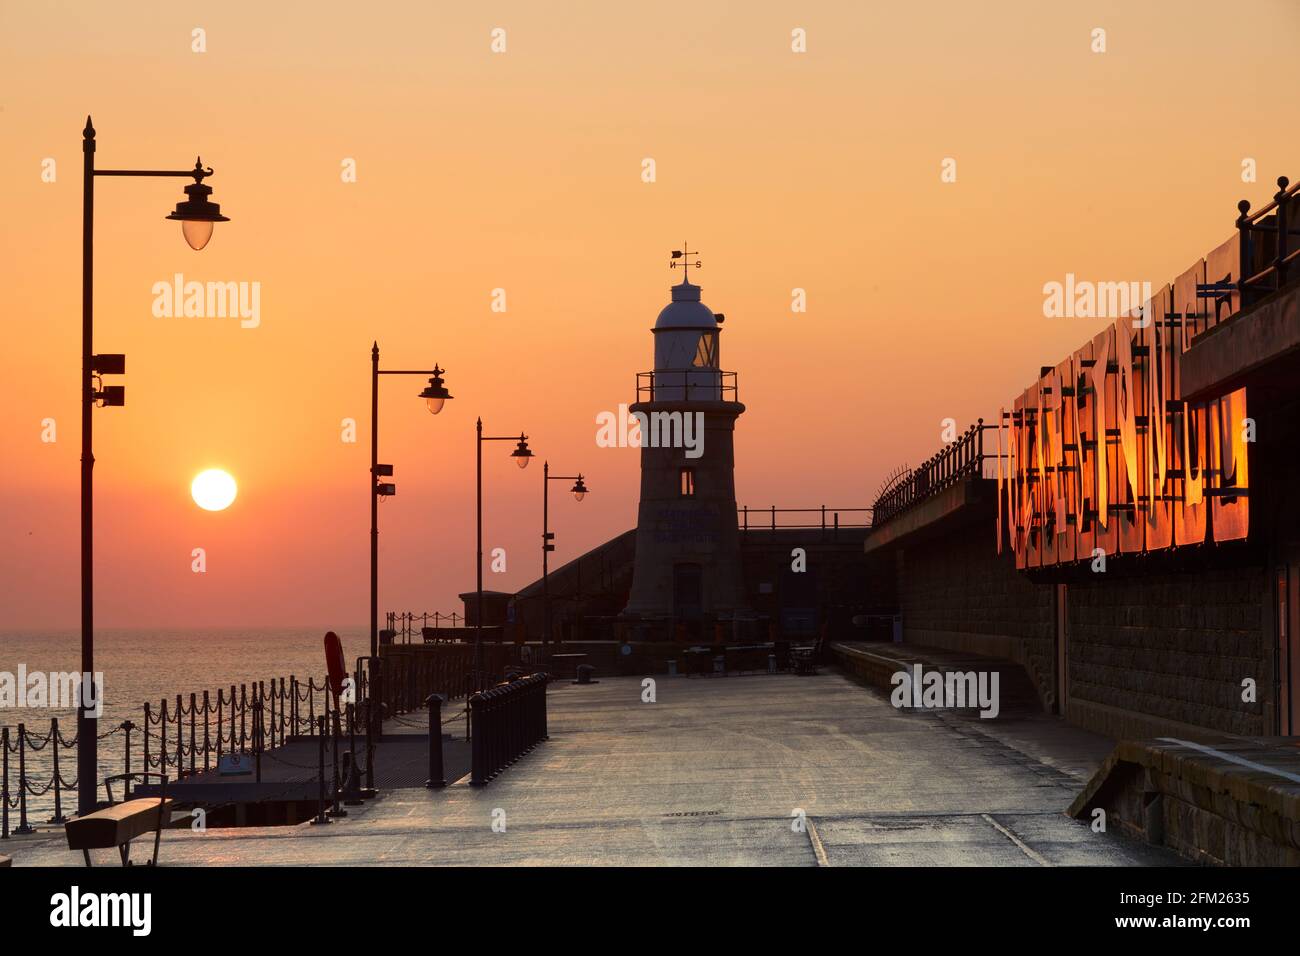 Sunrise over the Harbour Arm and Lighthouse Champagne Bar, Folkestone, Kent, England Stock Photo